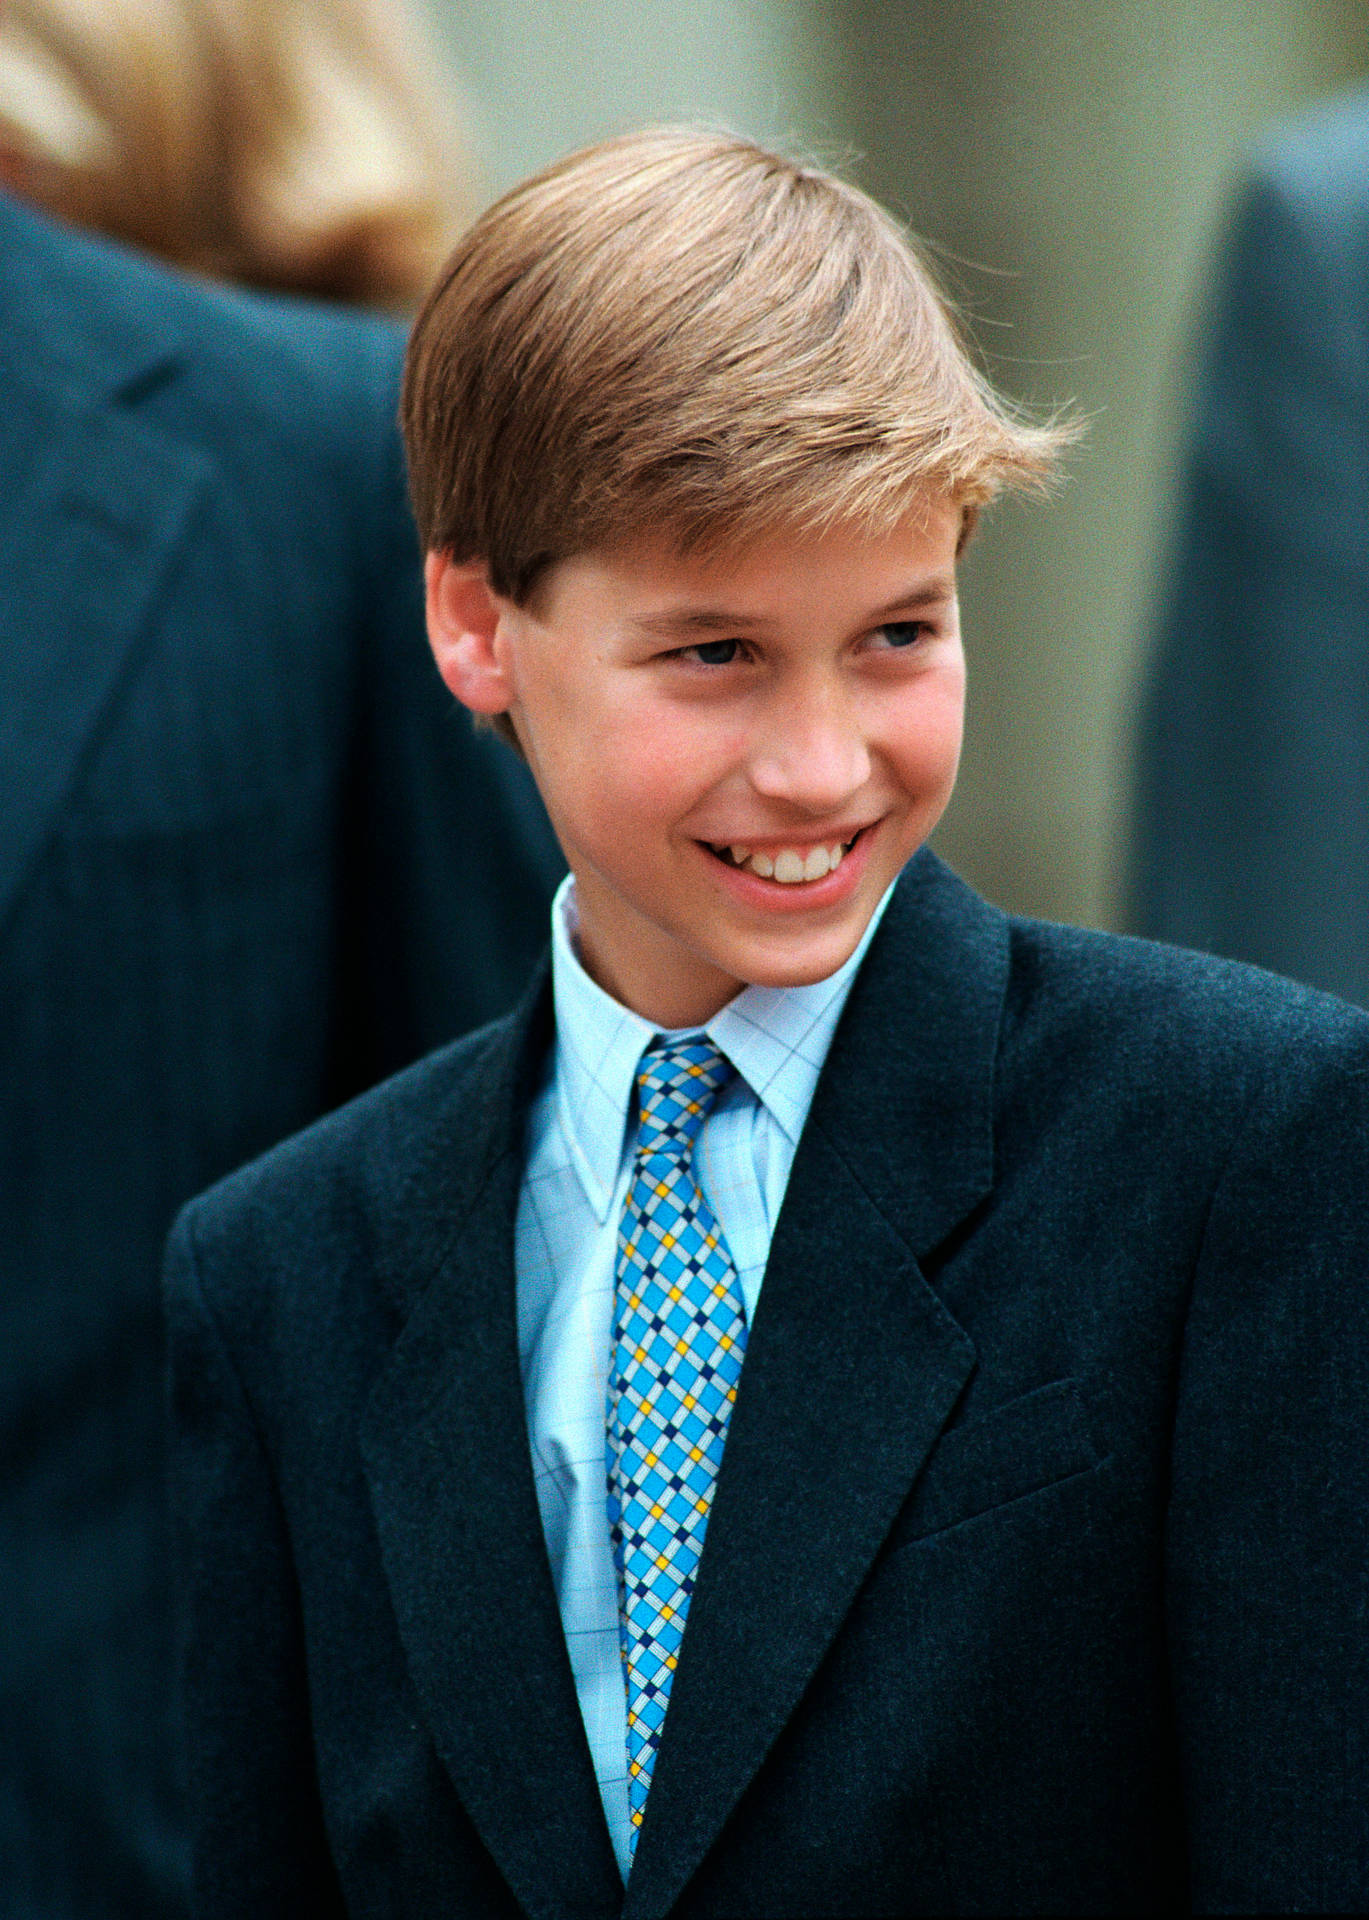 Prince William In A Formal Meeting Background